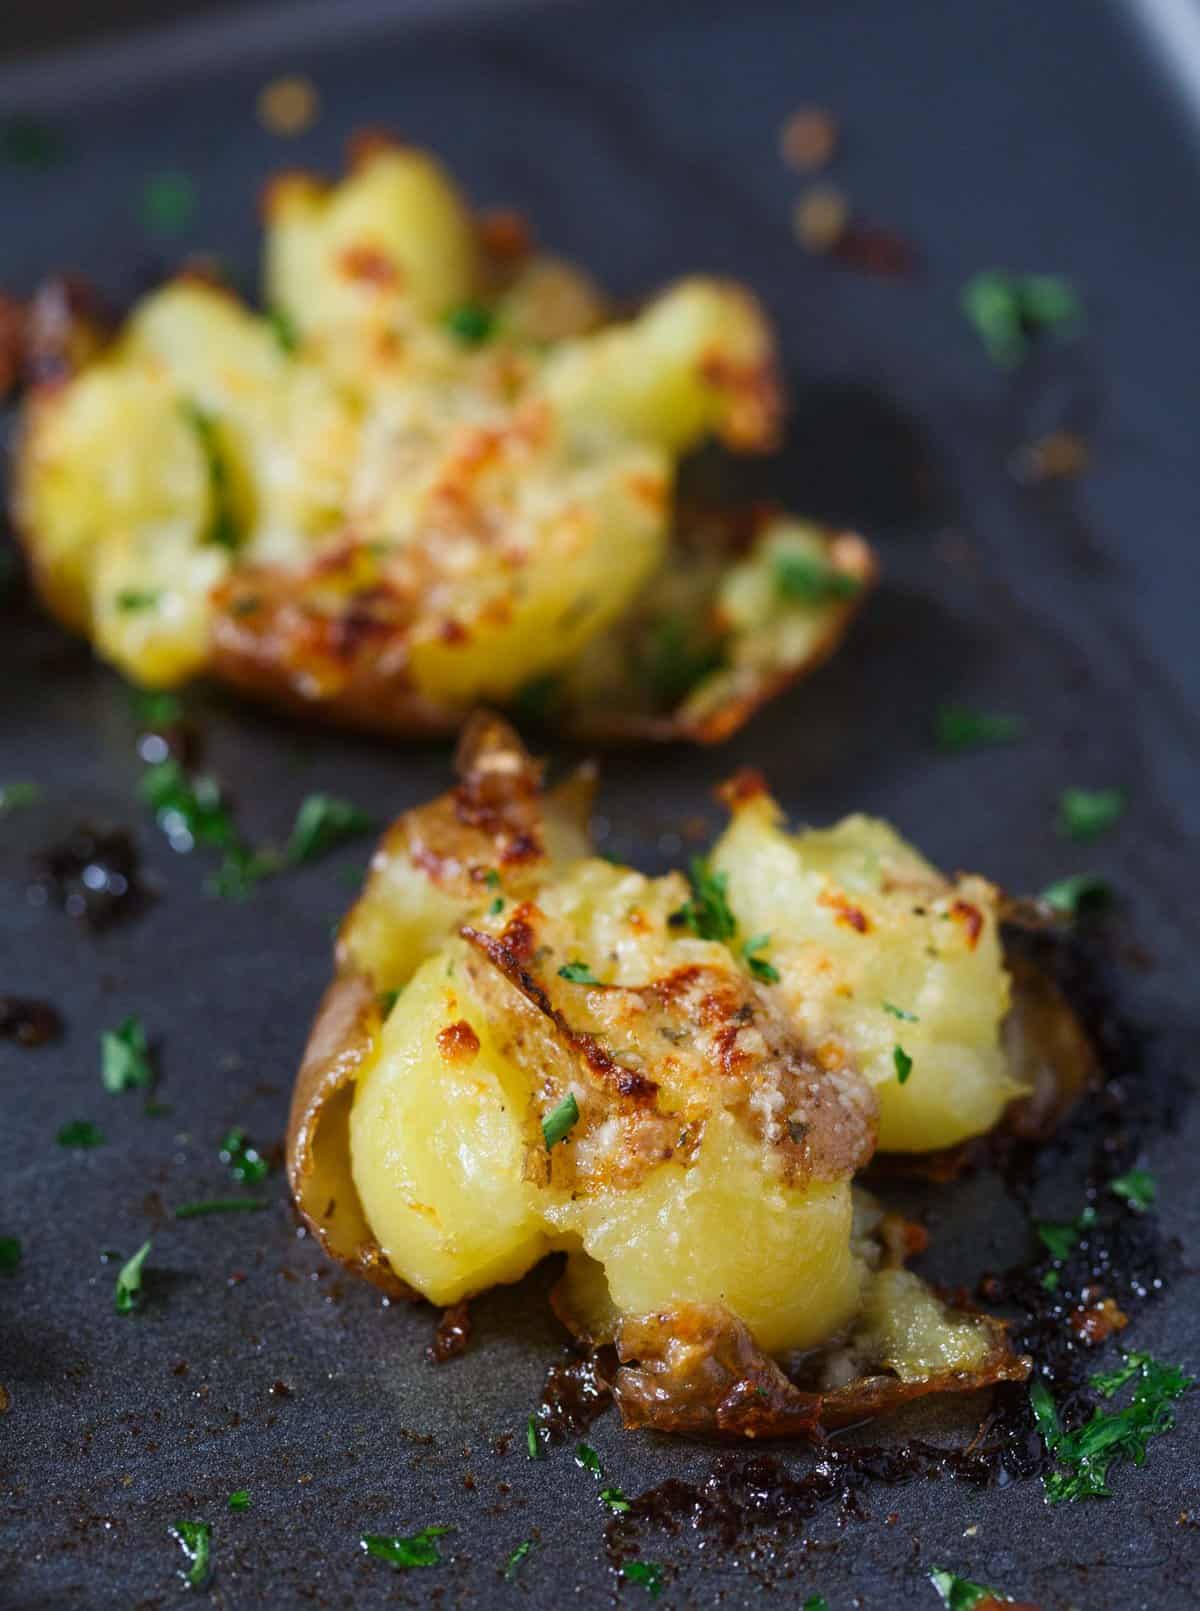 Smashed potatoes are a great alternative to mashed potatoes! These smashed potatoes are topped with a garlic ranch butter then parmesan cheese is sprinkled on top! SO GOOD!!